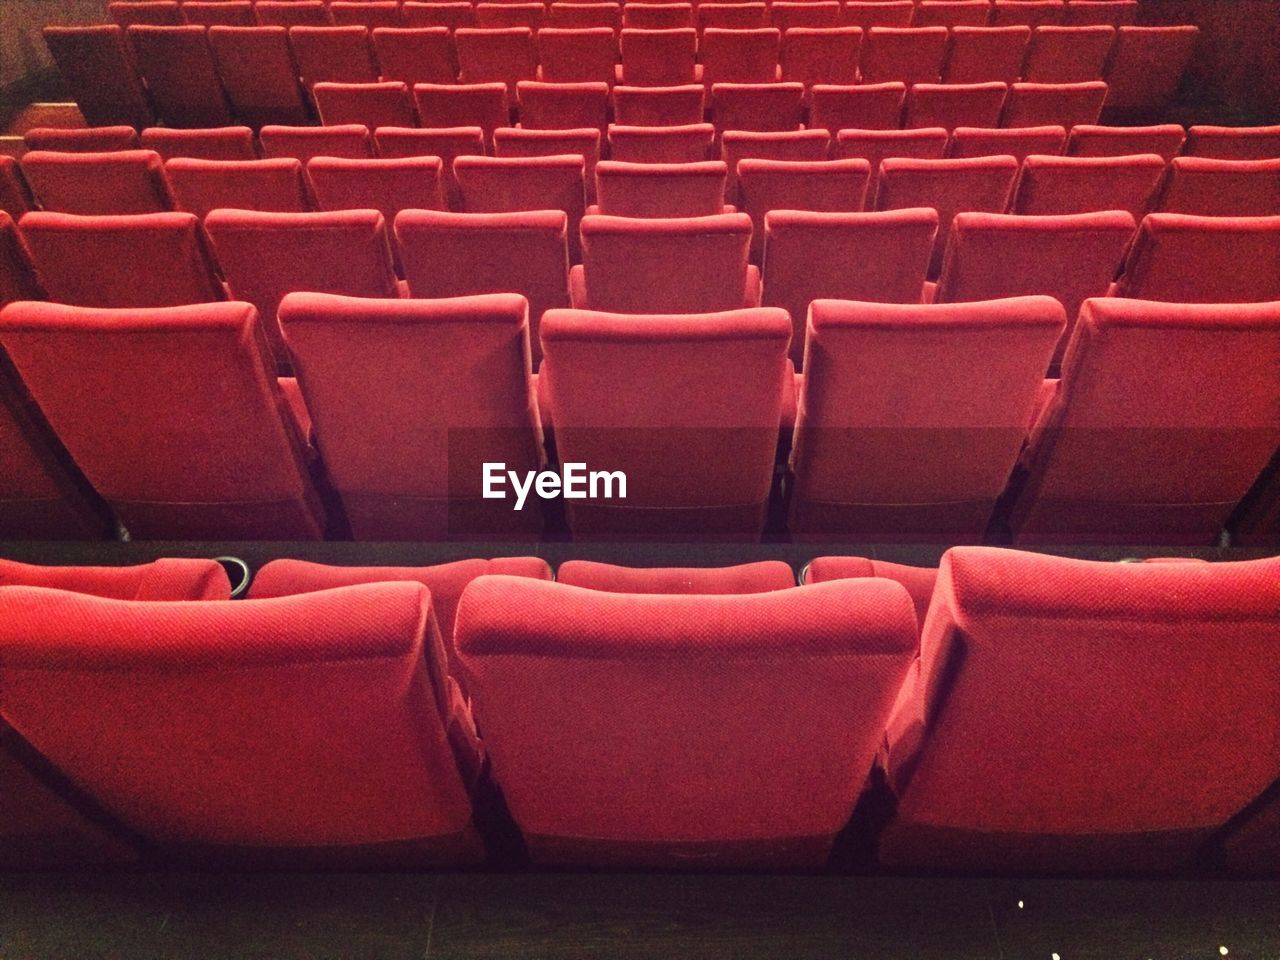 Empty seats in theater